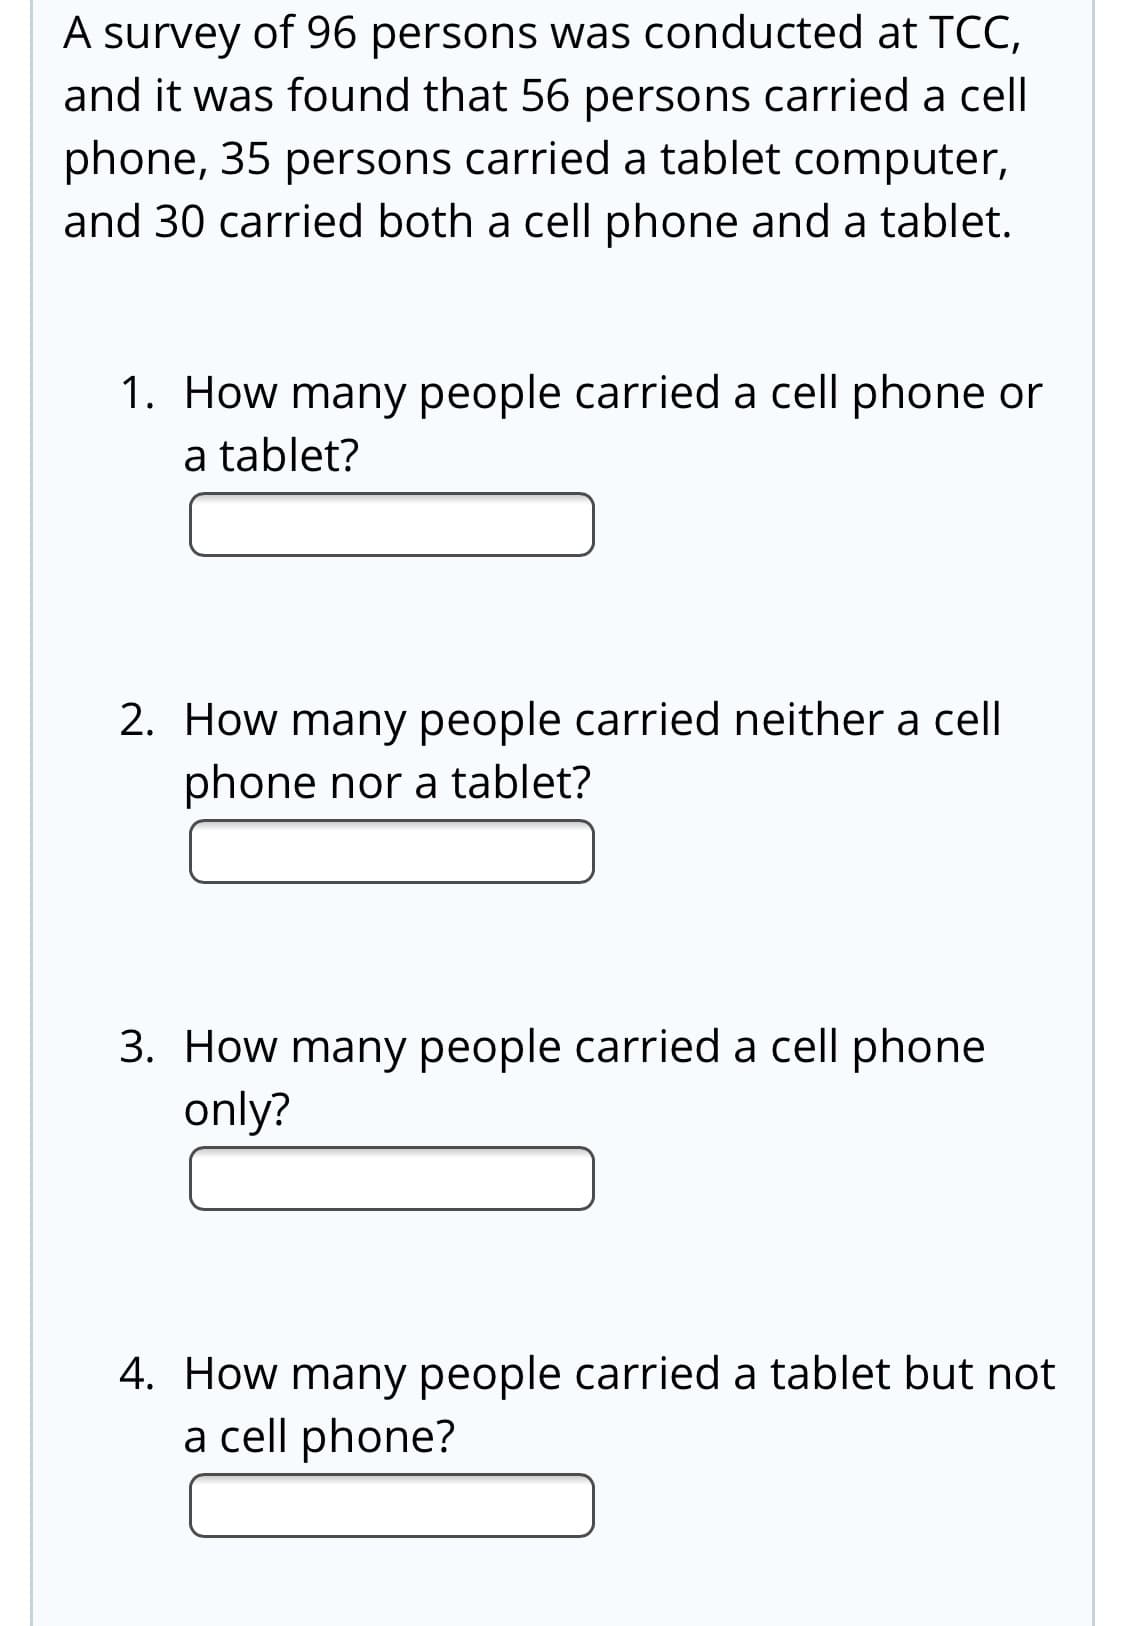 1. How many people carried a cell phone or
a tablet?
2. How many people carried neither a cell
phone nor a tablet?
